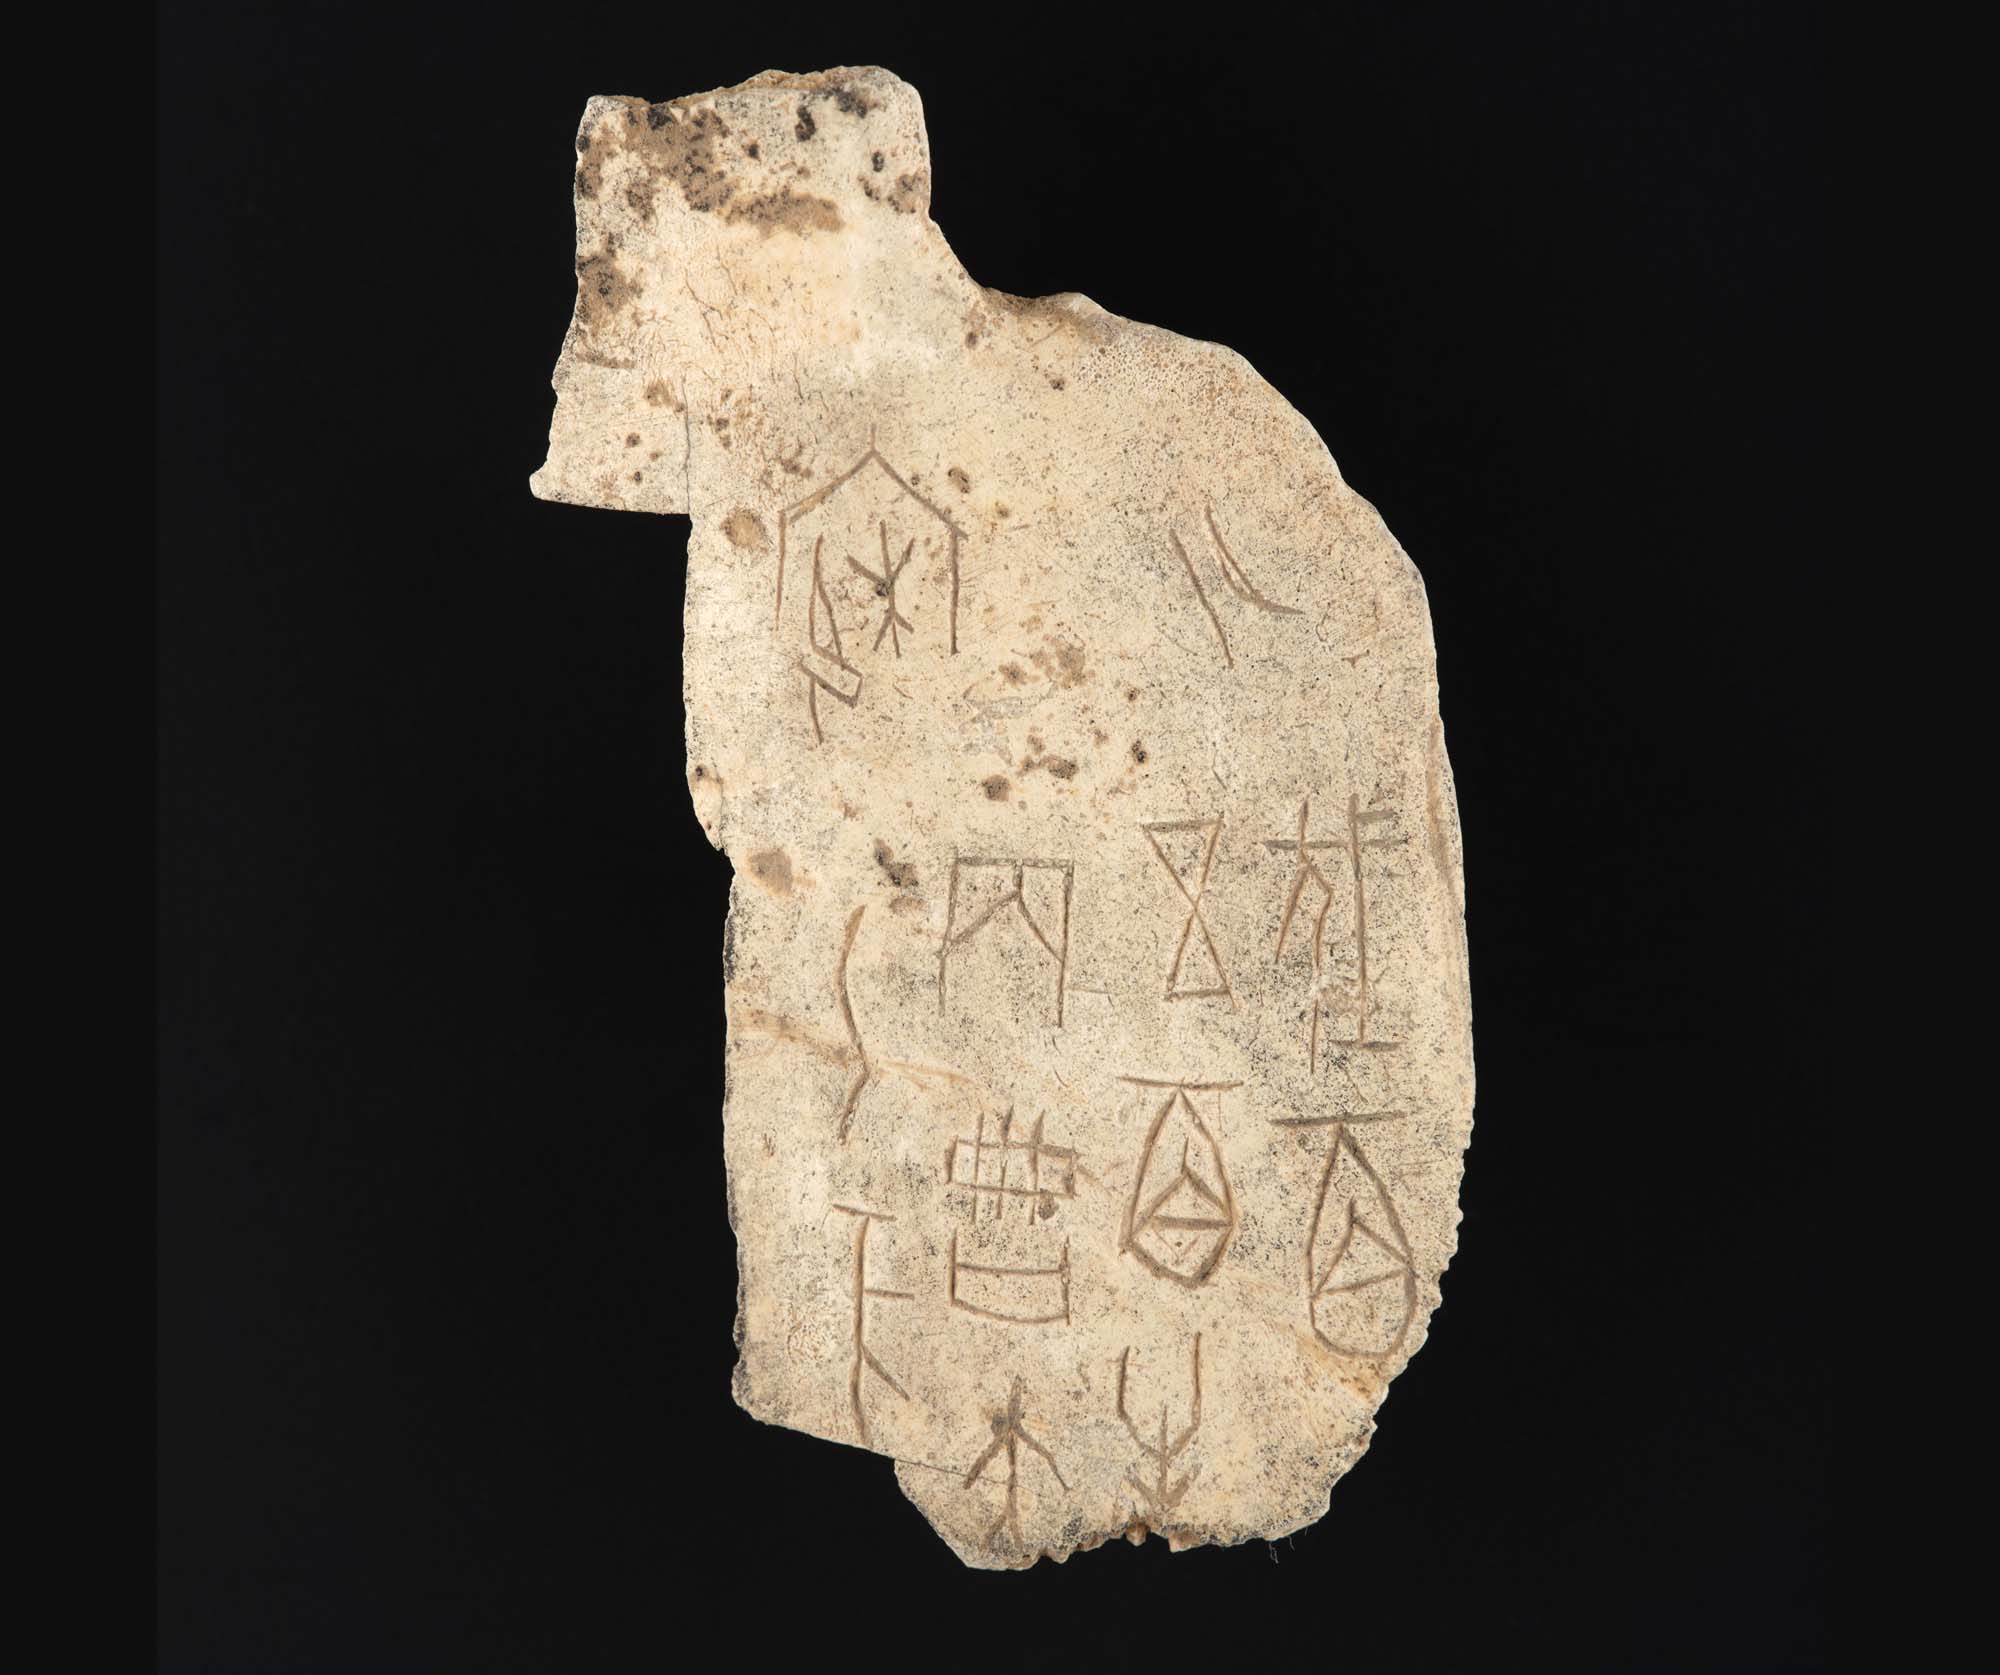 Oracle-bone-records-sacrificial-offering-of-500-oxen-before-a-military-attack.-Ox-scapula-or-tortoise-plastron-Yinxu-site-Anyang-Henan-Province-China-late-Shang-dynasty-c1200–1050-BC